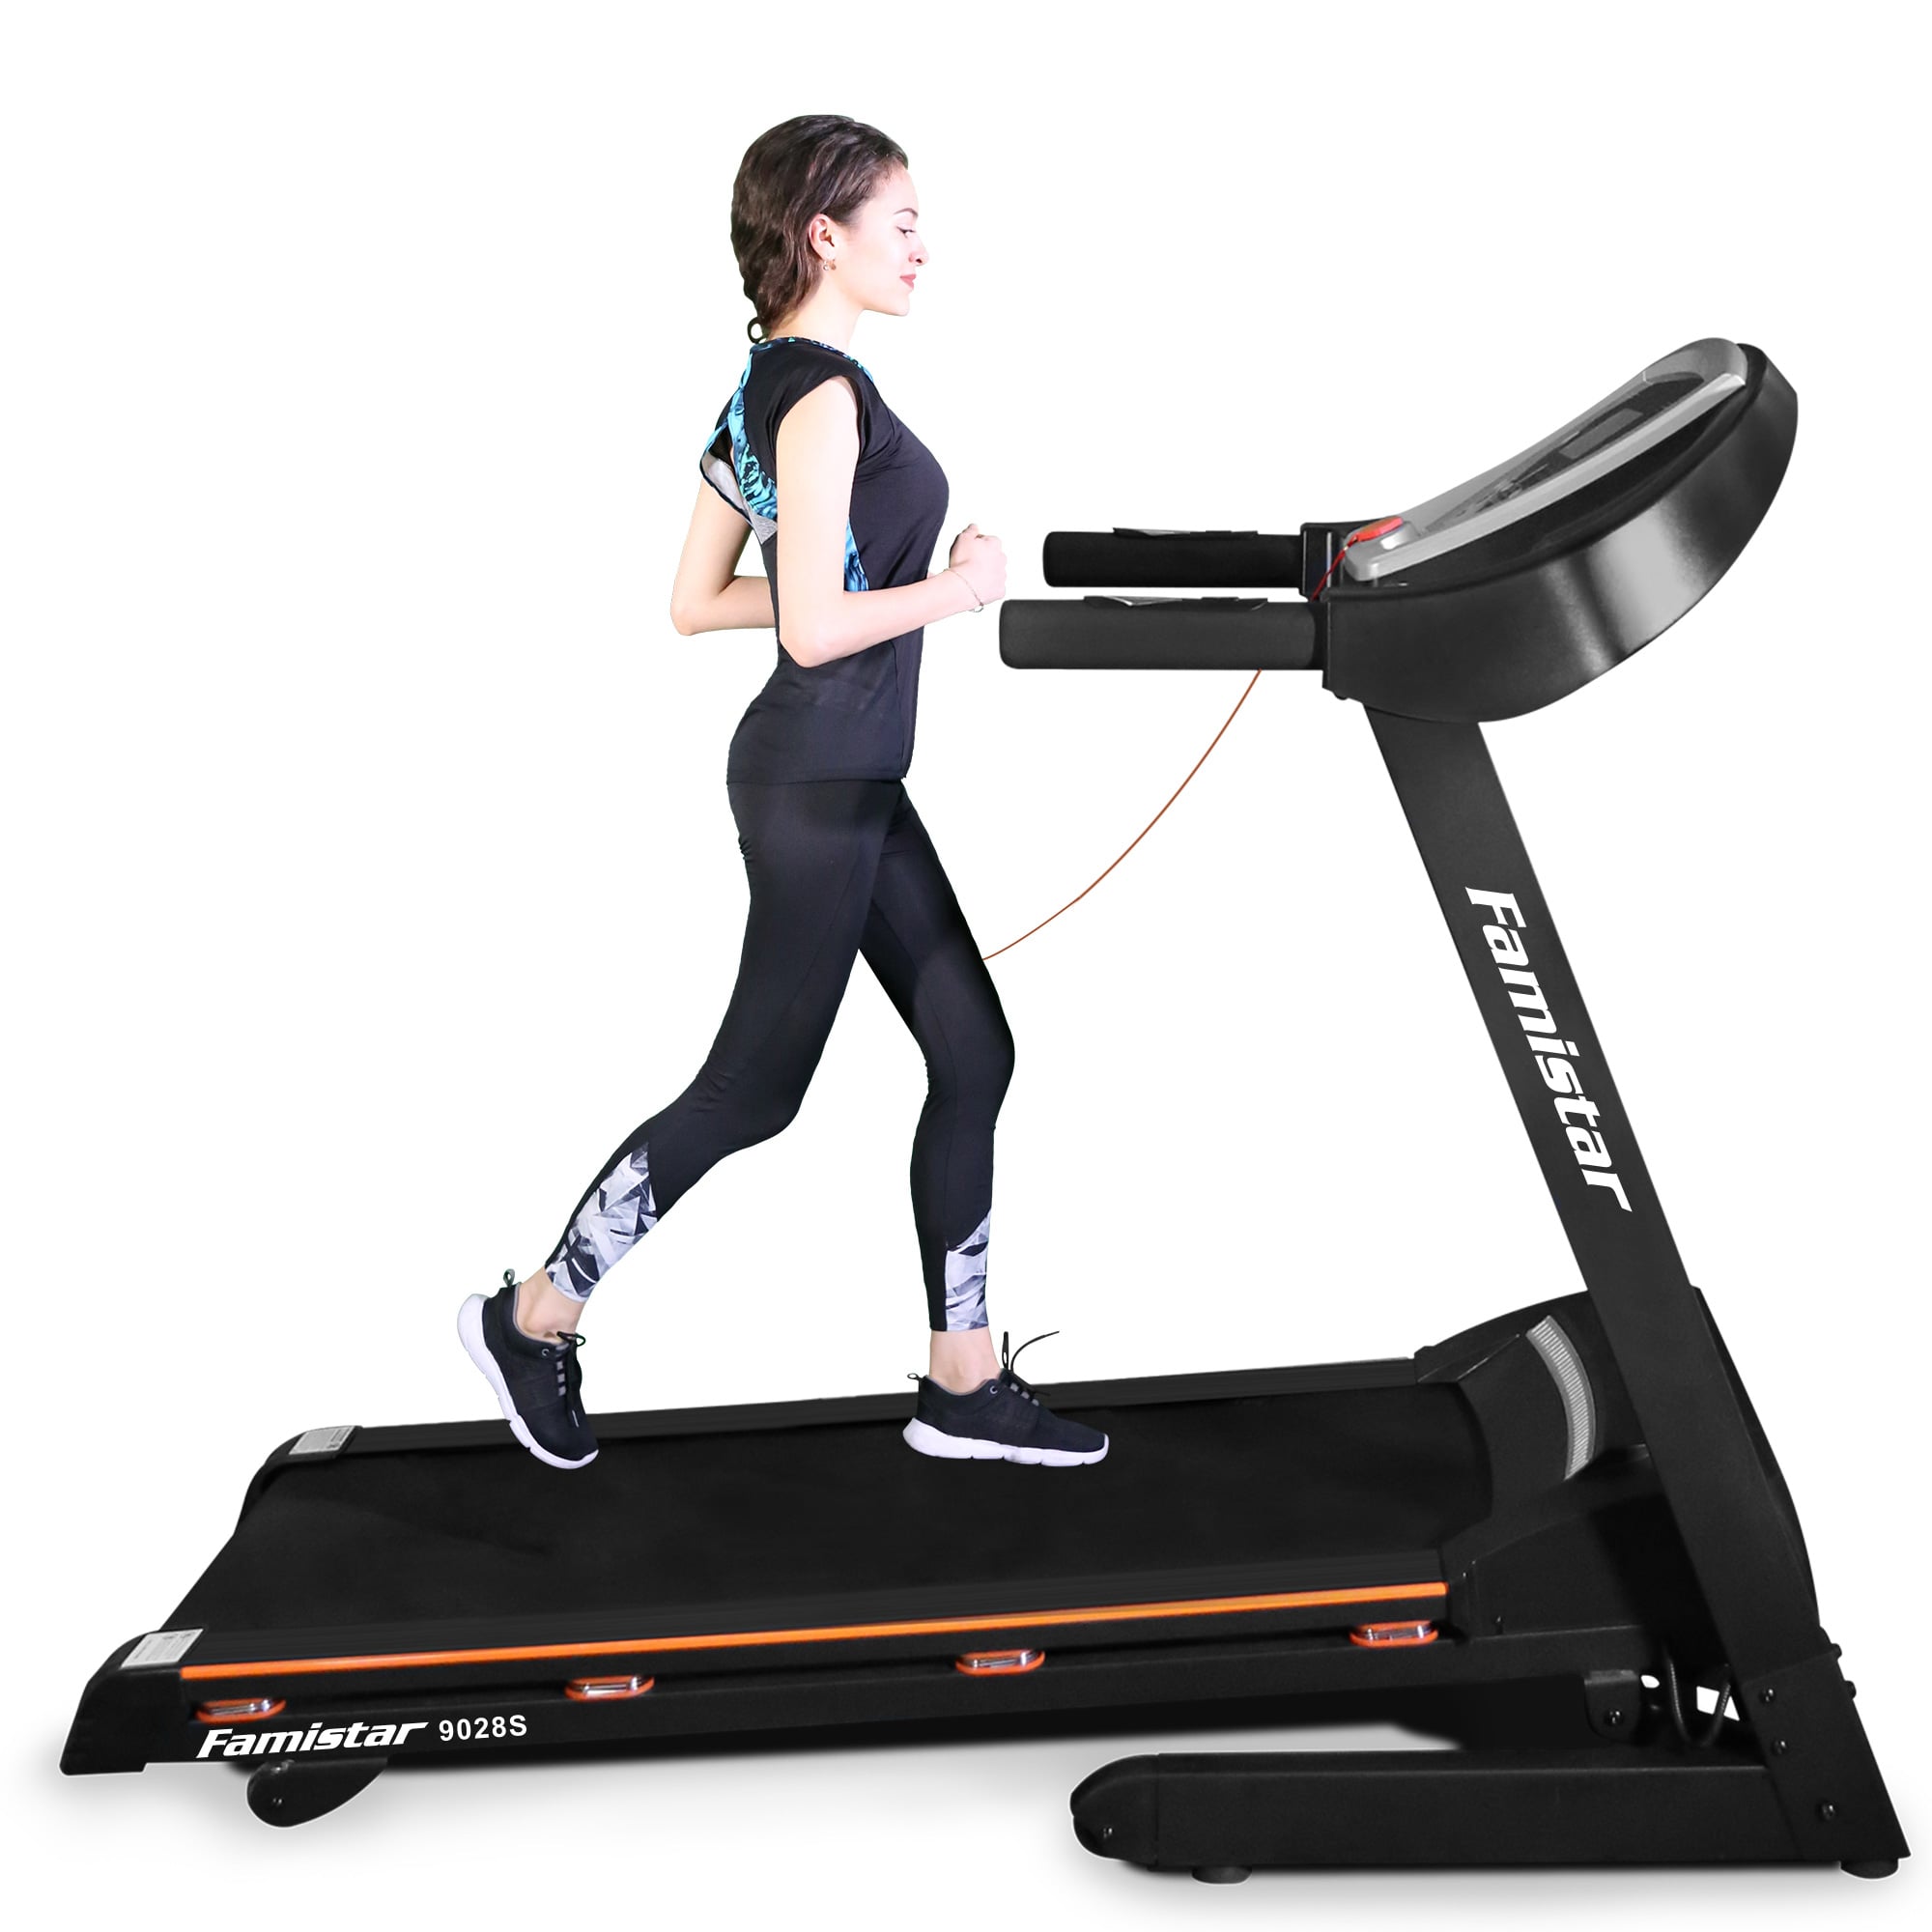 Led Treadmill for Home Running Machine with Remote Control for Indoor Exercise 1-6.0km/h Speed Portable Treadmill Working Treadmills for Running Under Desk Treadmills for Home Bkisy Treadmill